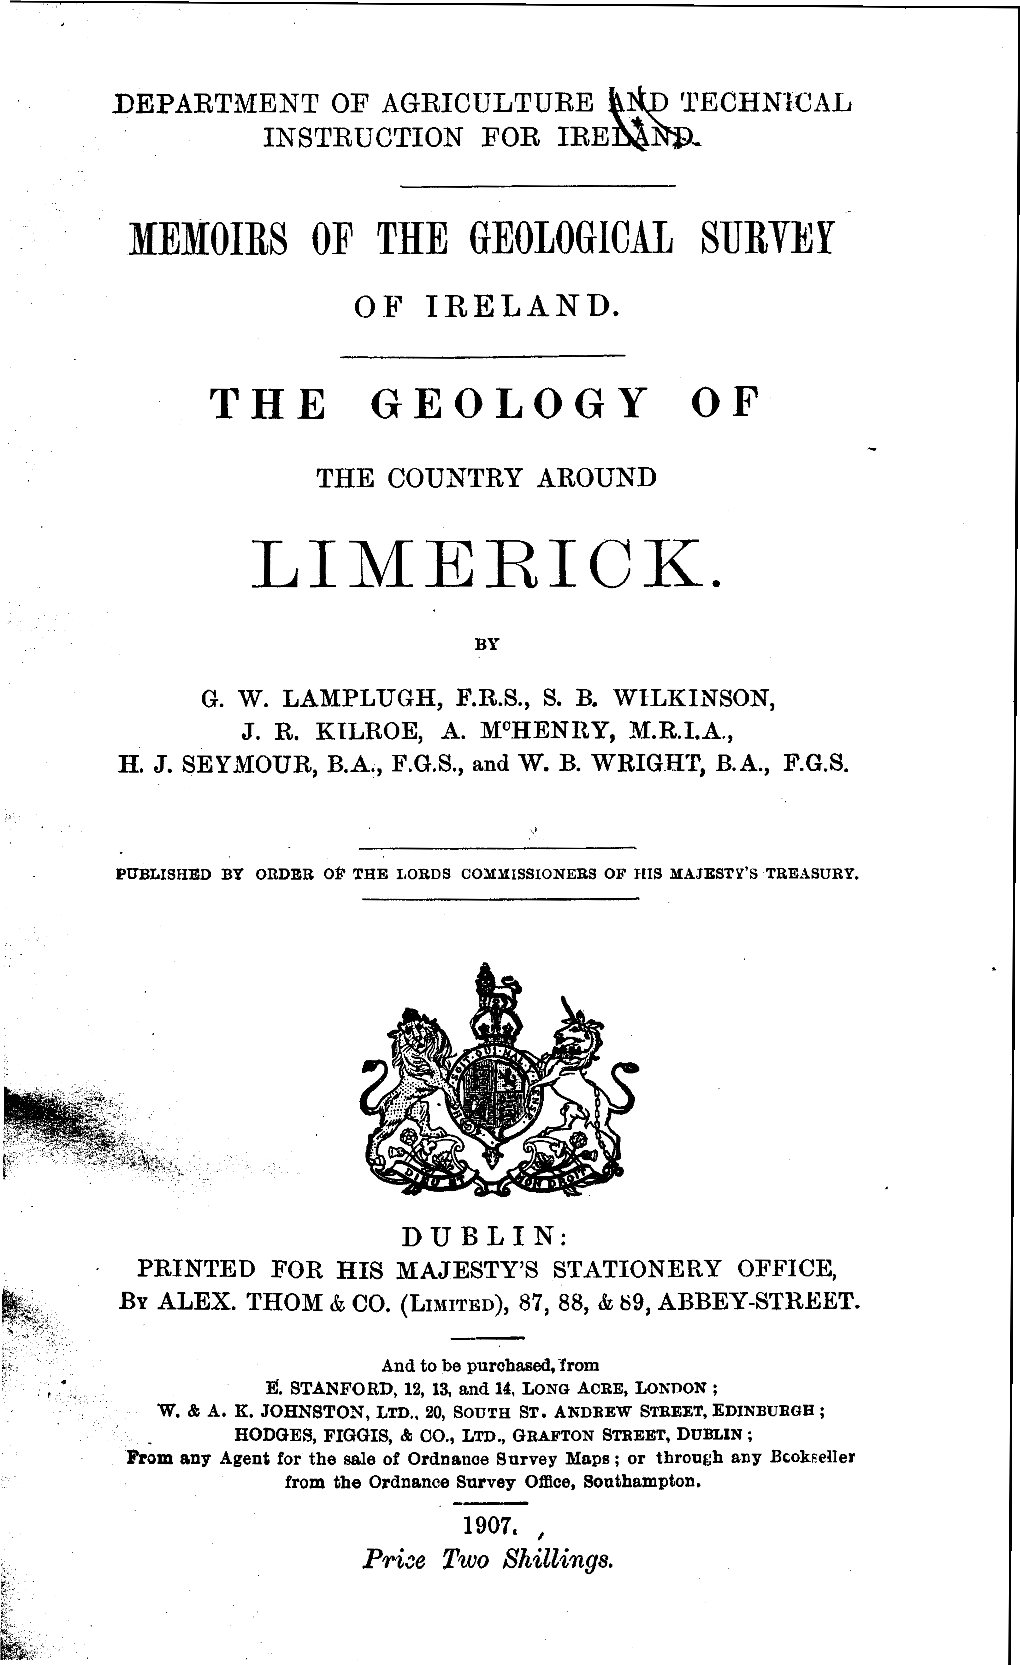 The Geology of the Country Around Limerick